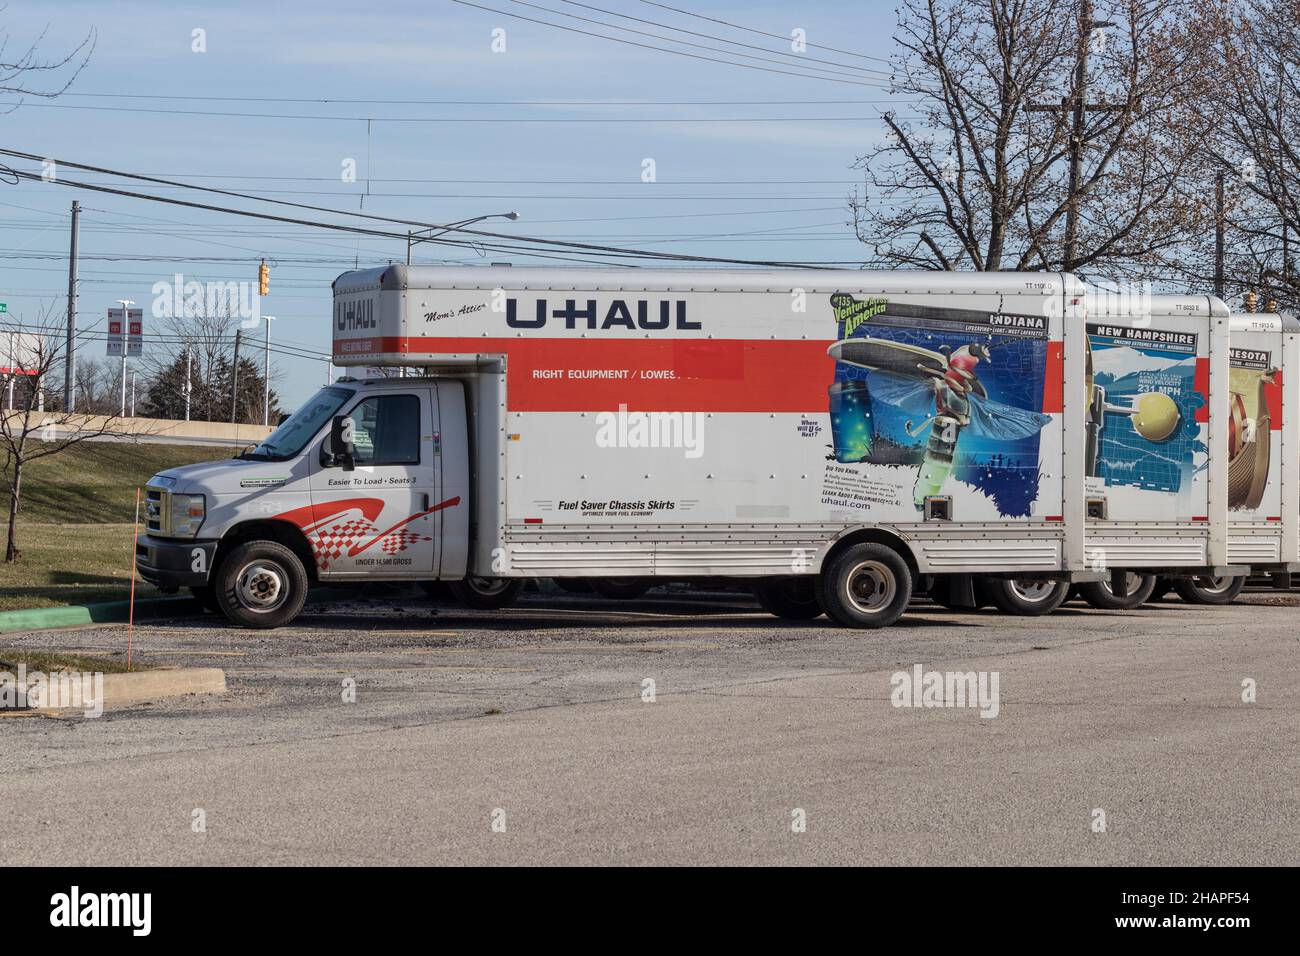 Lafayette - Circa December 2021: U-Haul Moving Truck Rental Location. U-Haul offers moving and storage solutions. Stock Photo